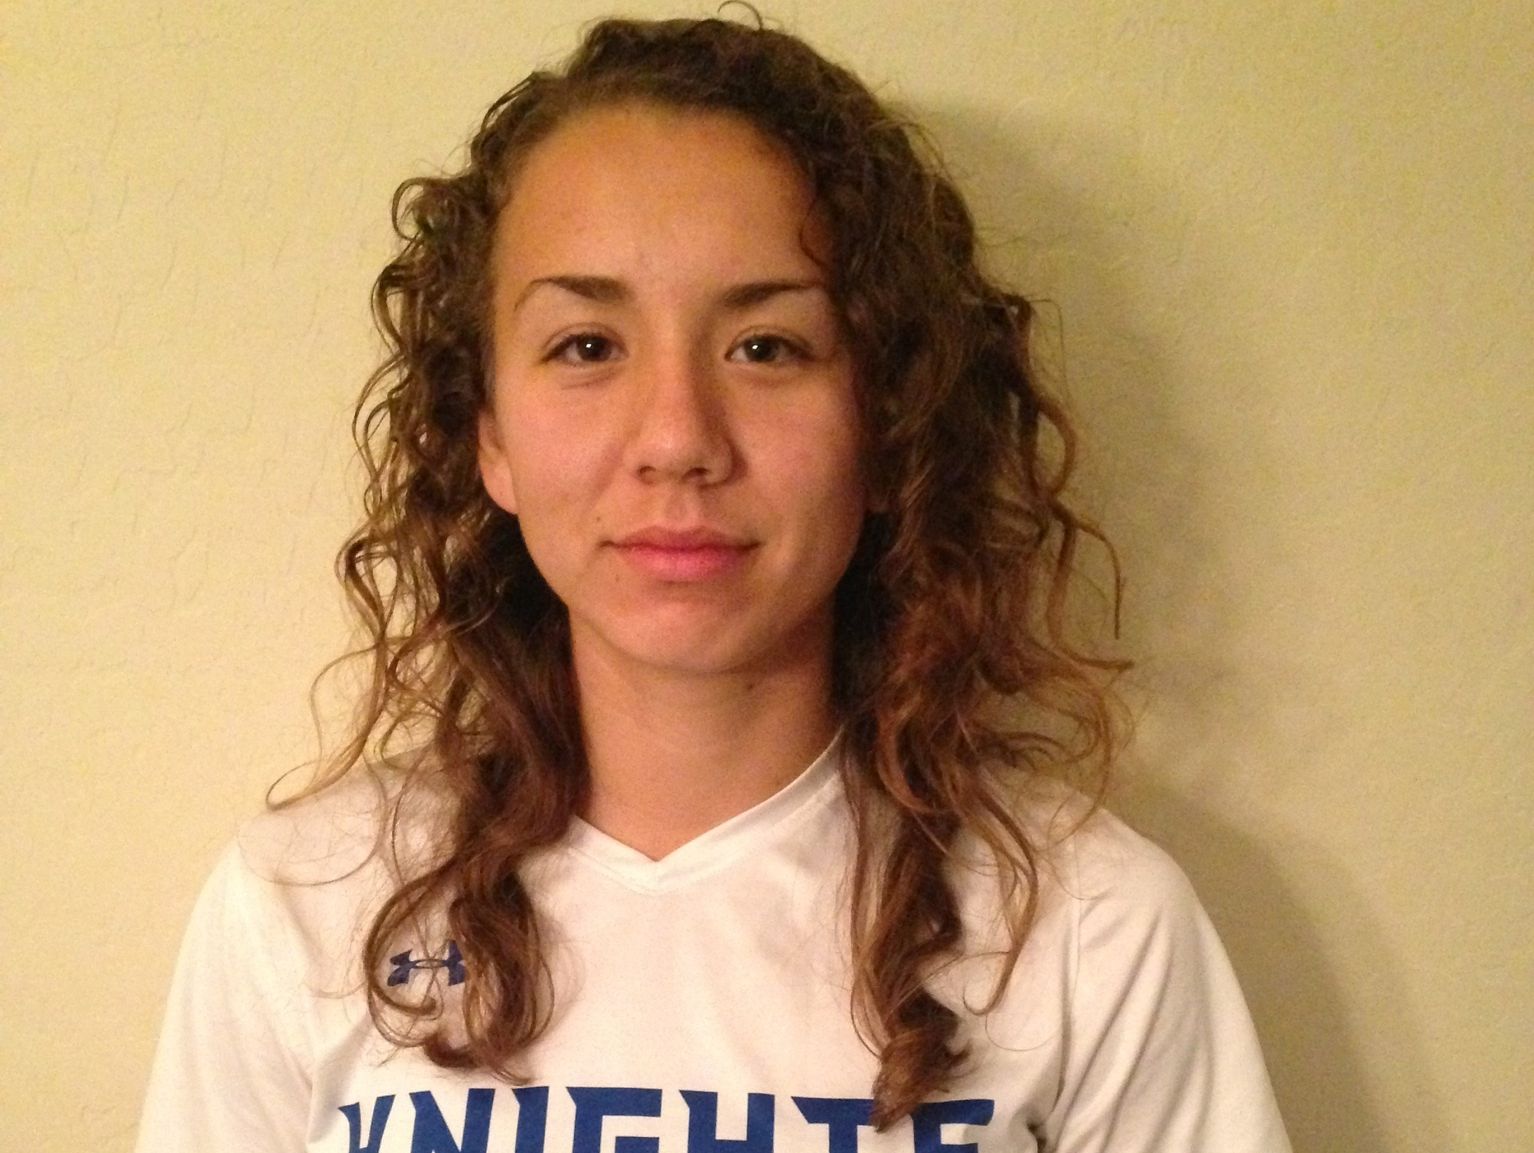 Olivia Hernandez, from Avondale Westview, is azcentral sports' Female Athlete of the Week for Jan. 28 - Feb. 4, presented by La-Z-Boy Furniture Galleries.